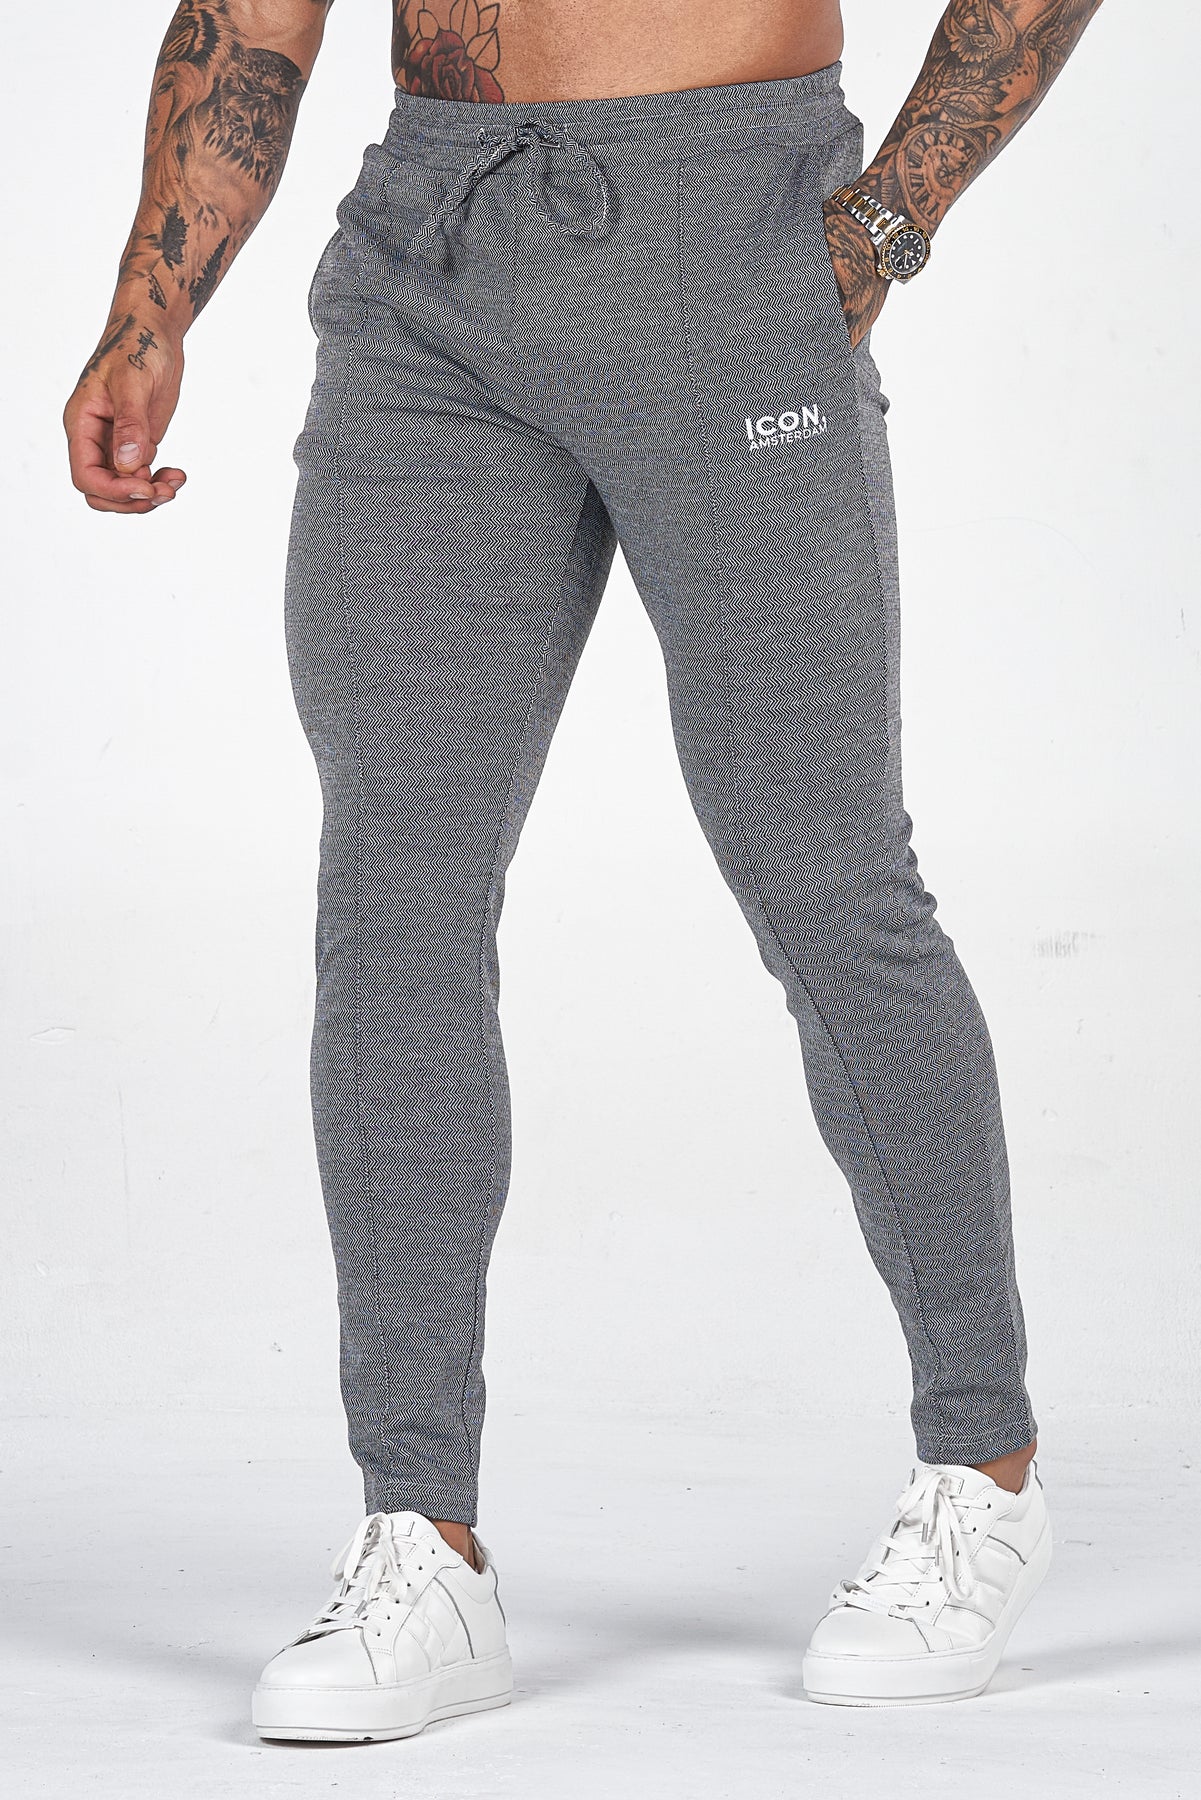 THE ACE TROUSERS - GREY | ICON. AMSTERDAM